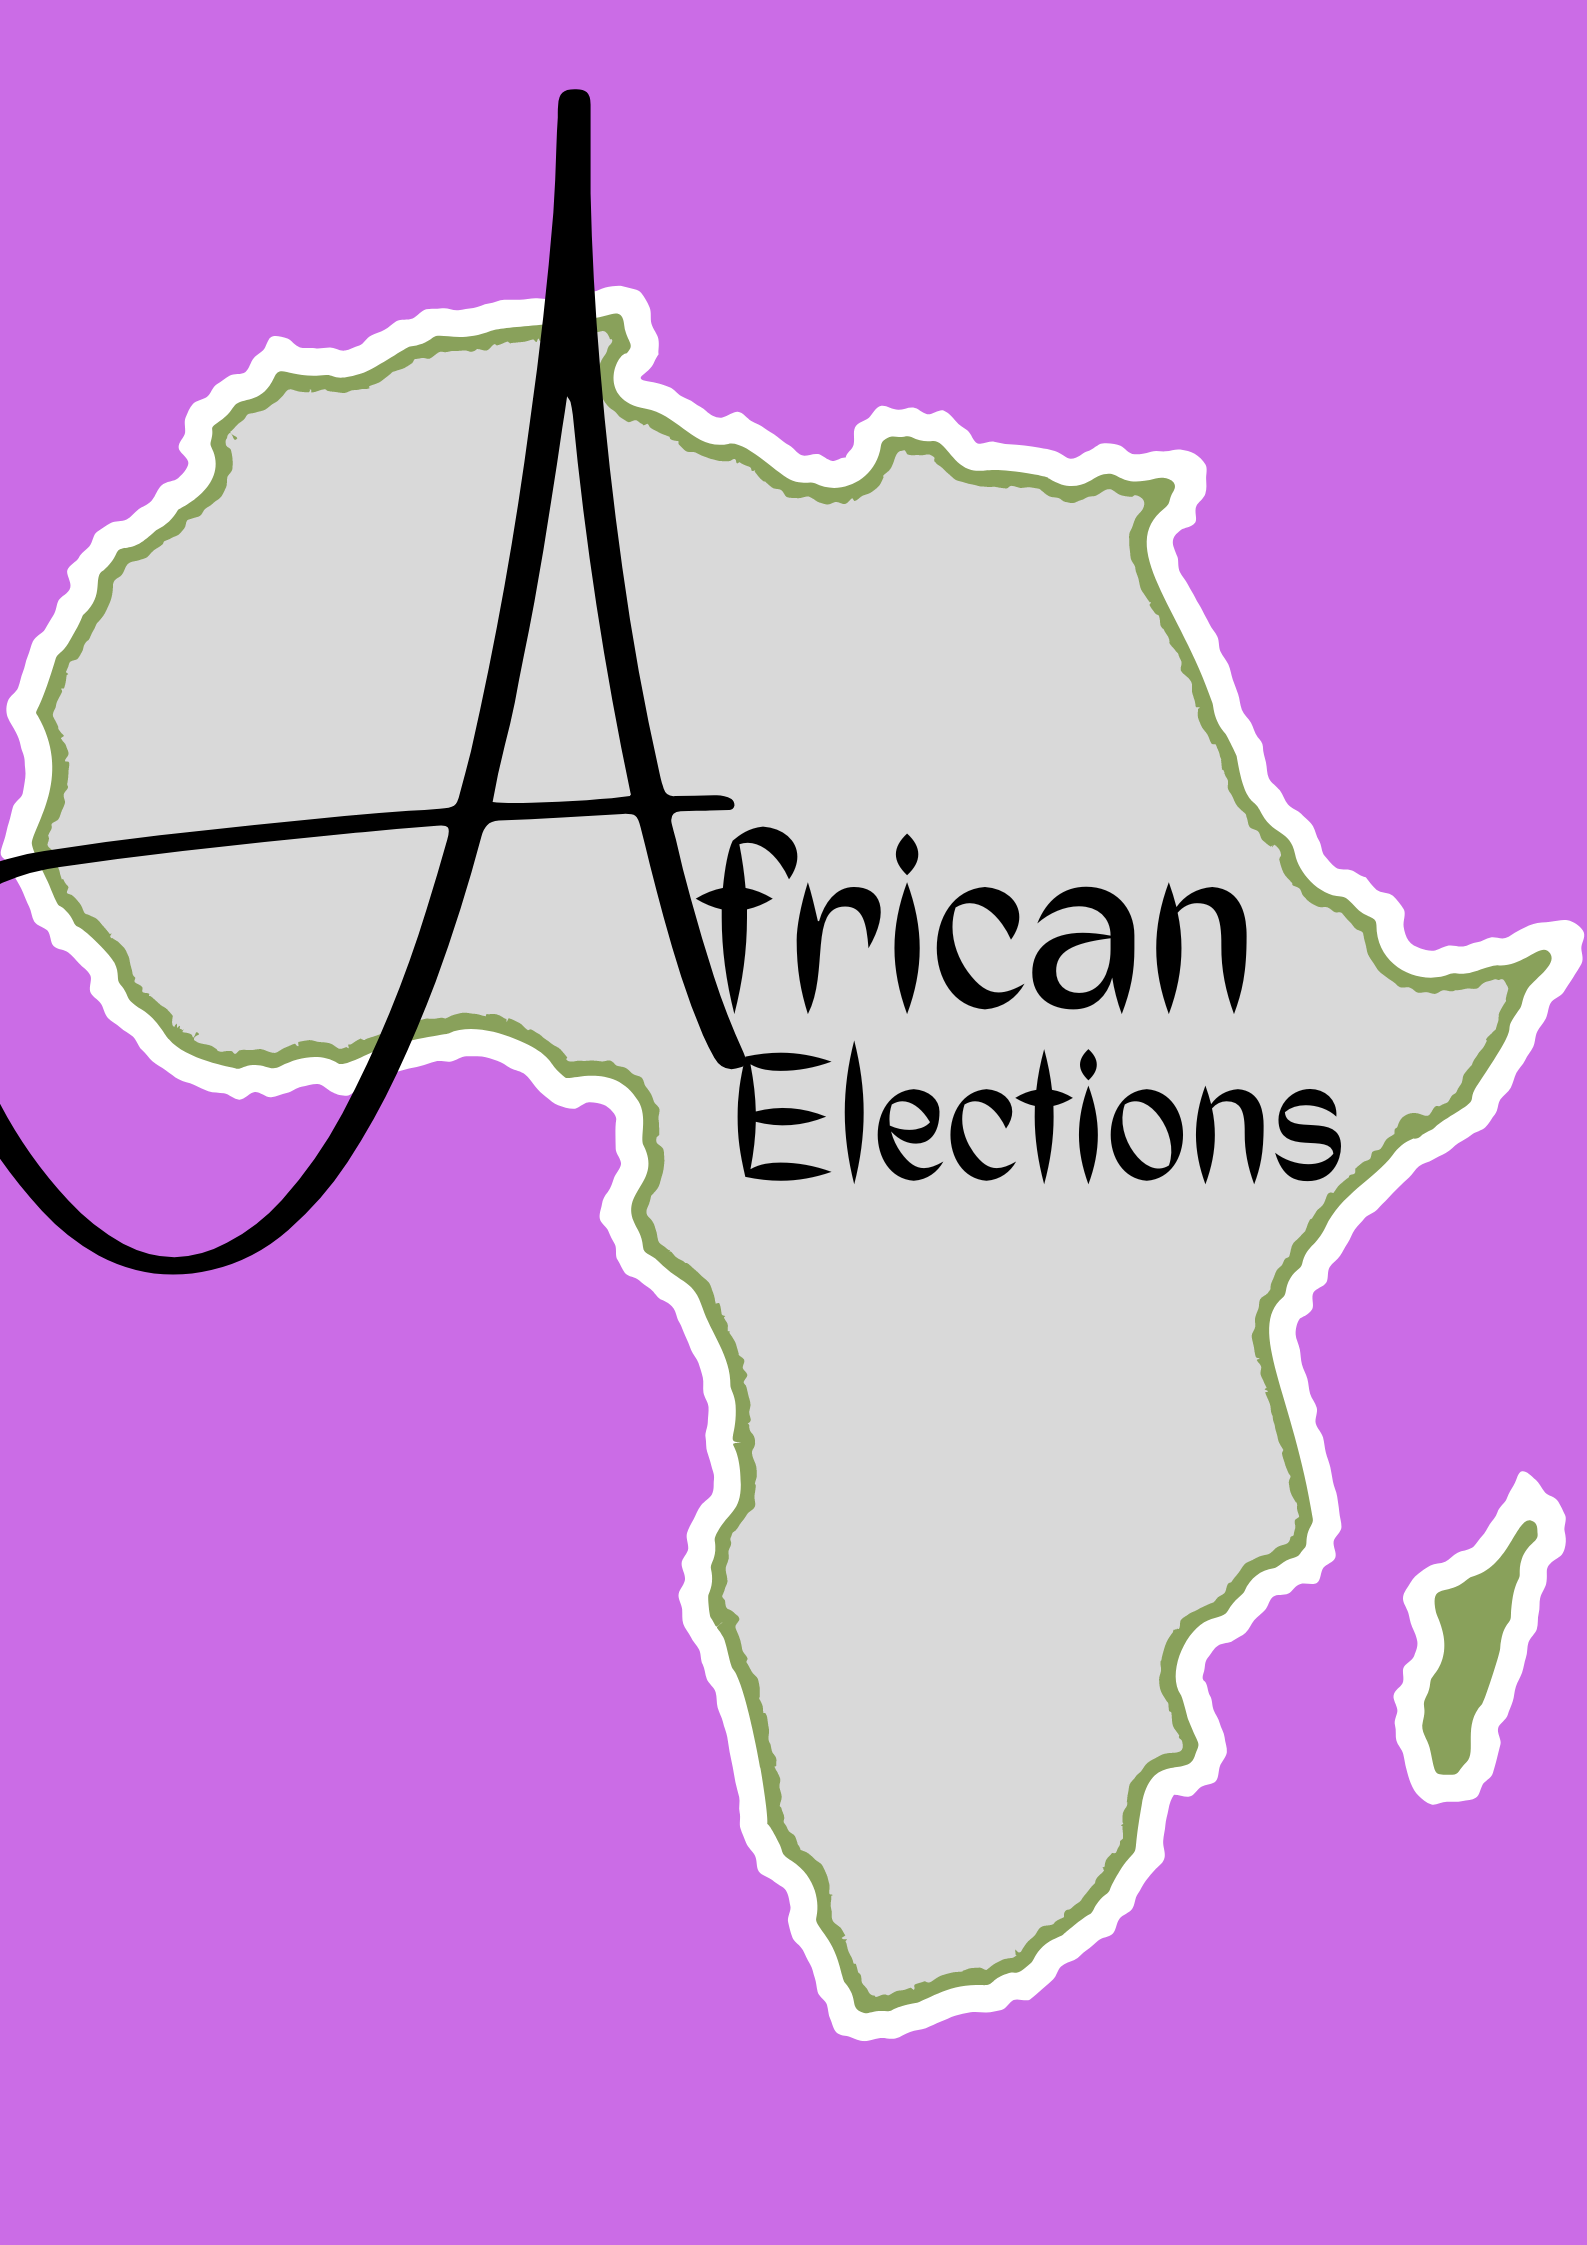 African Election